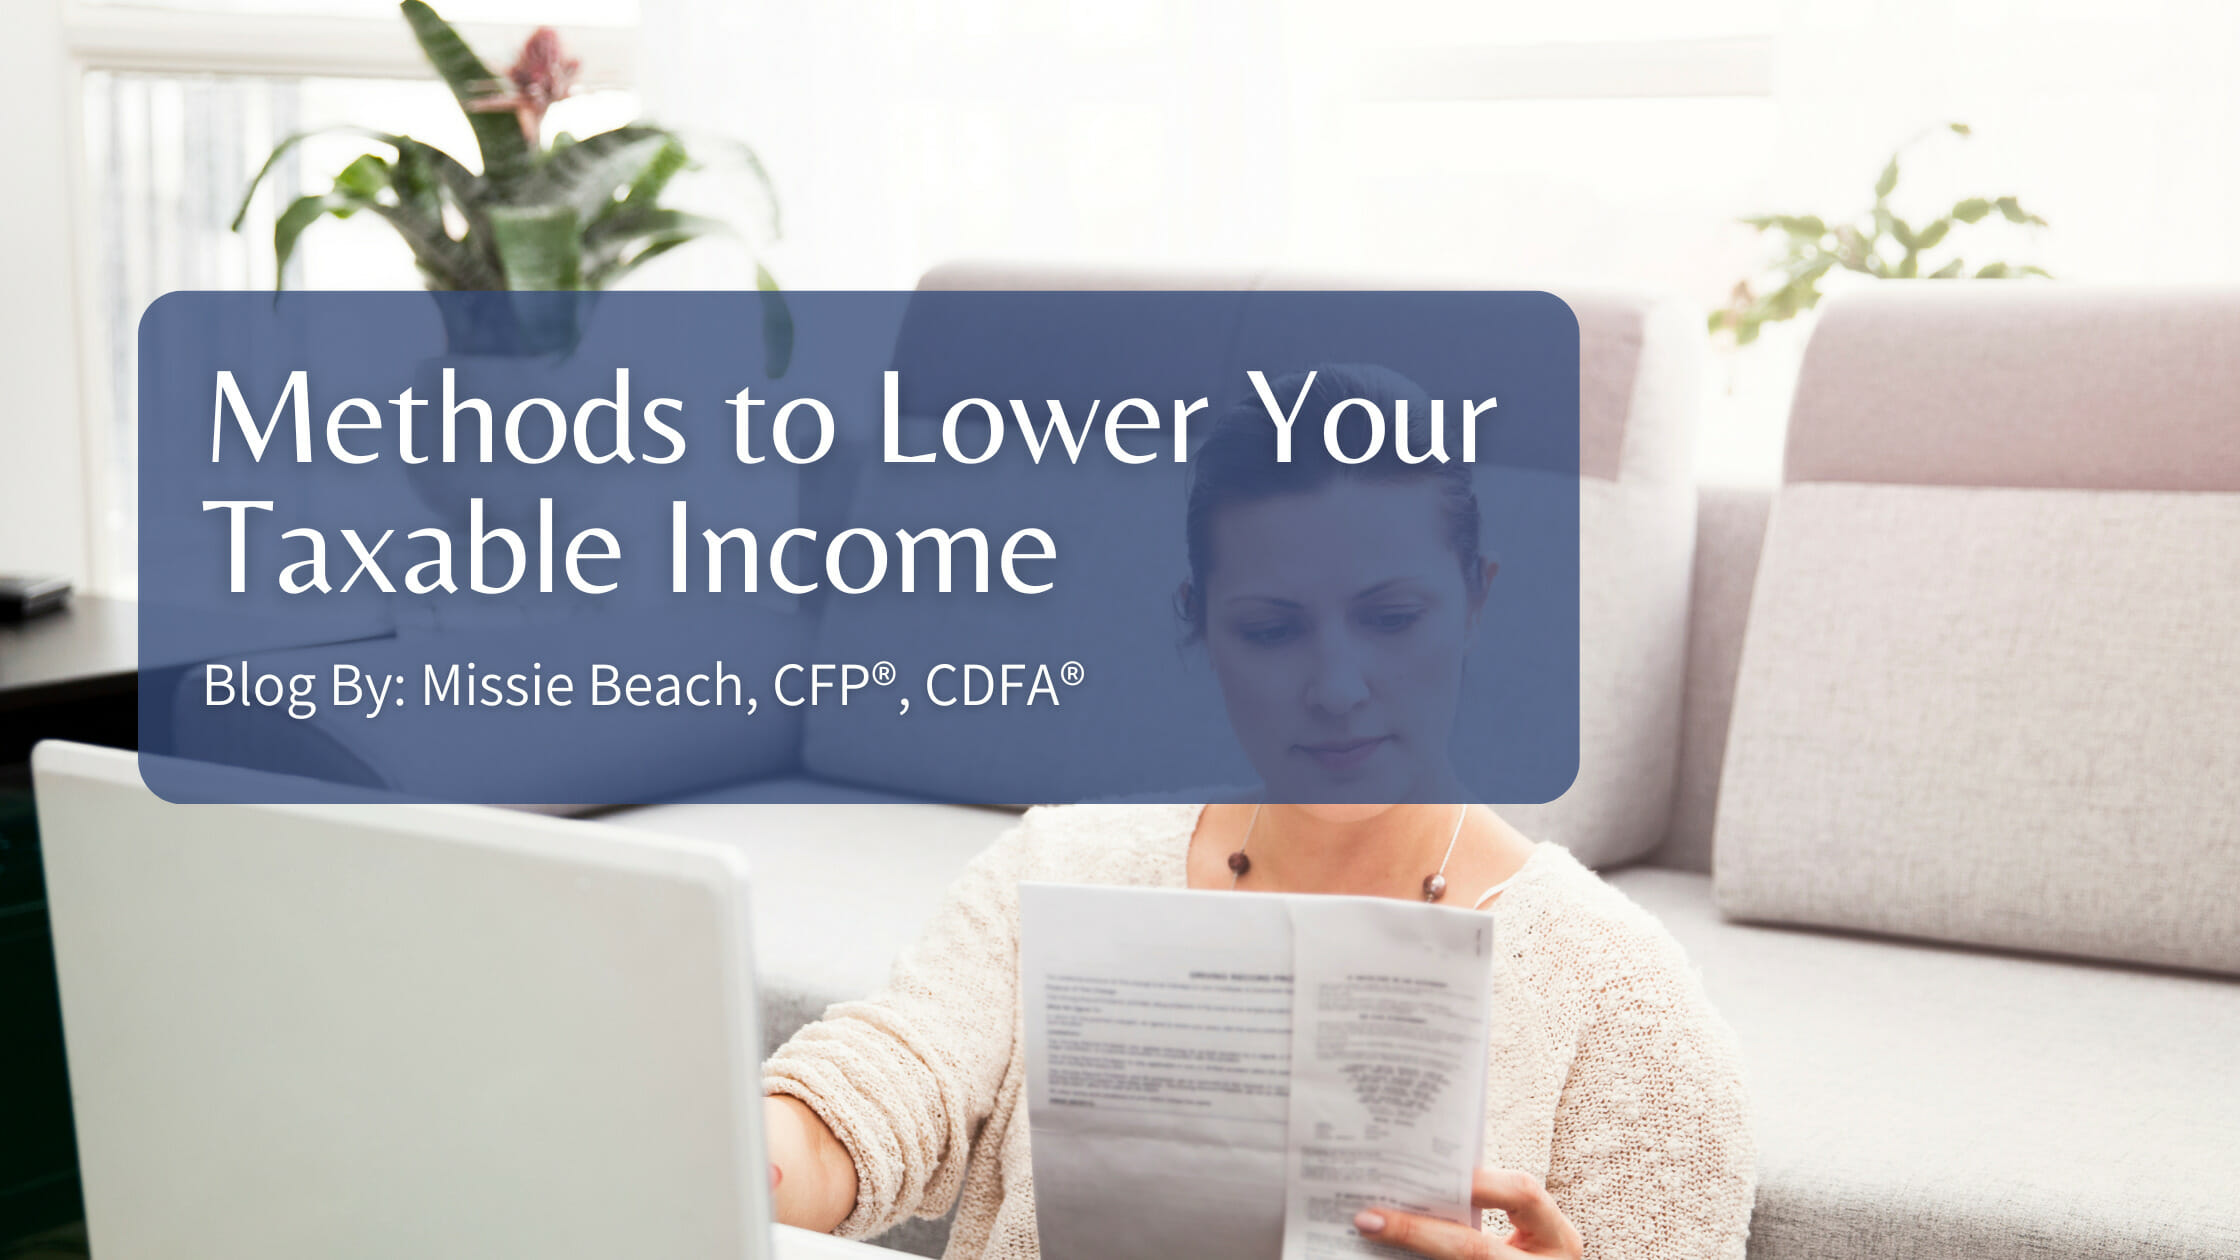 Methods to Lower Your Taxable Income